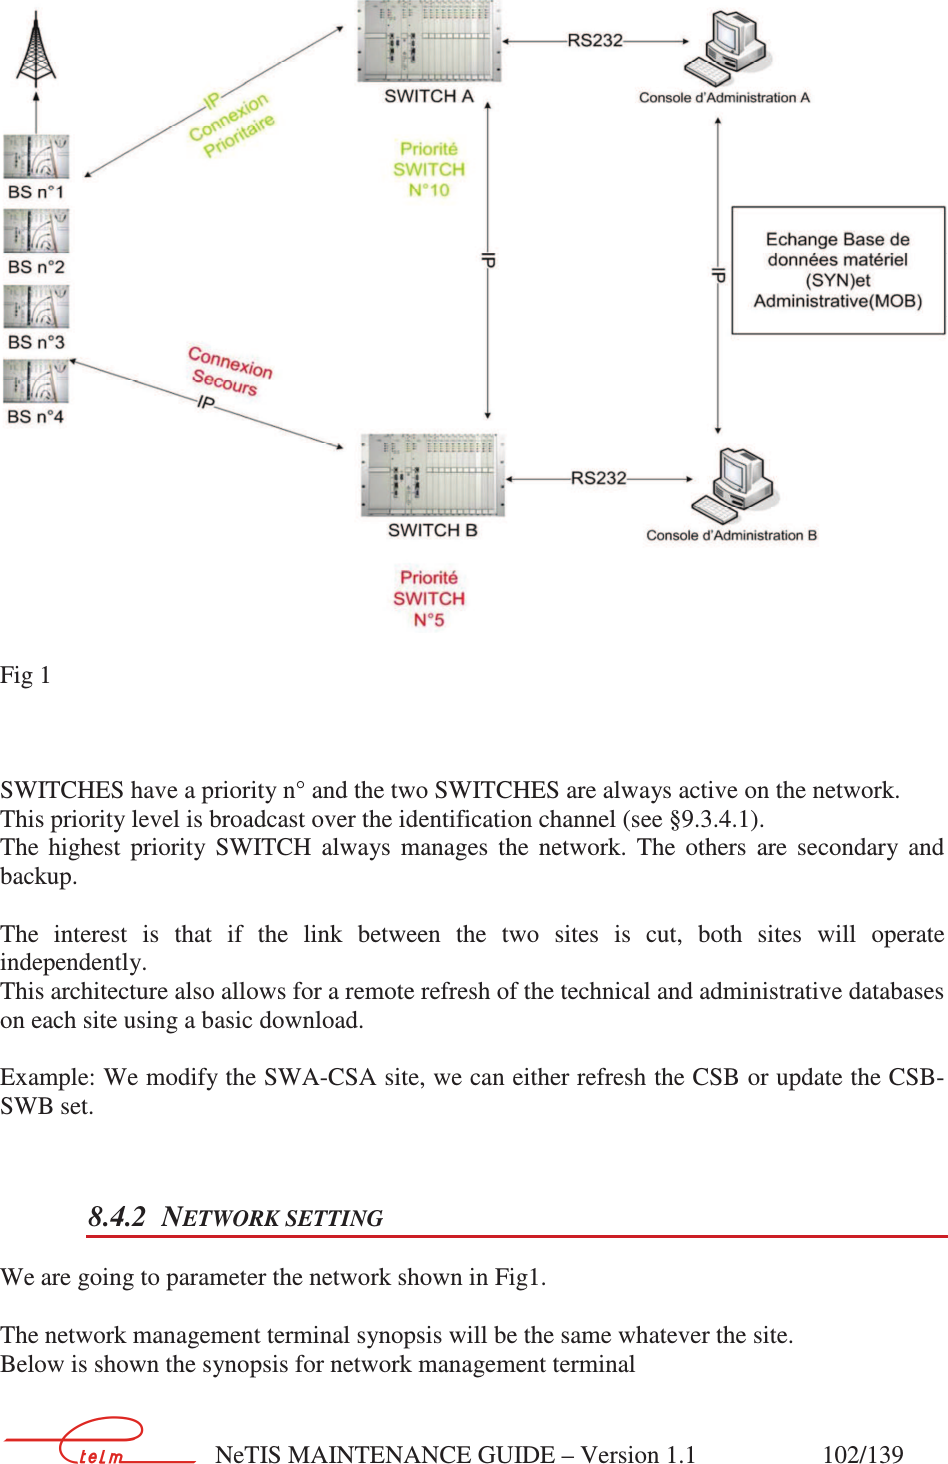        NeTIS MAINTENANCE GUIDE – Version 1.1                    102/139     Fig 1    SWITCHES have a priority n° and the two SWITCHES are always active on the network. This priority level is broadcast over the identification channel (see §9.3.4.1). The  highest  priority  SWITCH  always  manages  the  network.  The  others  are  secondary  and backup.   The  interest  is  that  if  the  link  between  the  two  sites  is  cut,  both  sites  will  operate independently. This architecture also allows for a remote refresh of the technical and administrative databases on each site using a basic download.  Example: We modify the SWA-CSA site, we can either refresh the CSB or update the CSB-SWB set.  8.4.2 NETWORK SETTING We are going to parameter the network shown in Fig1.  The network management terminal synopsis will be the same whatever the site. Below is shown the synopsis for network management terminal 